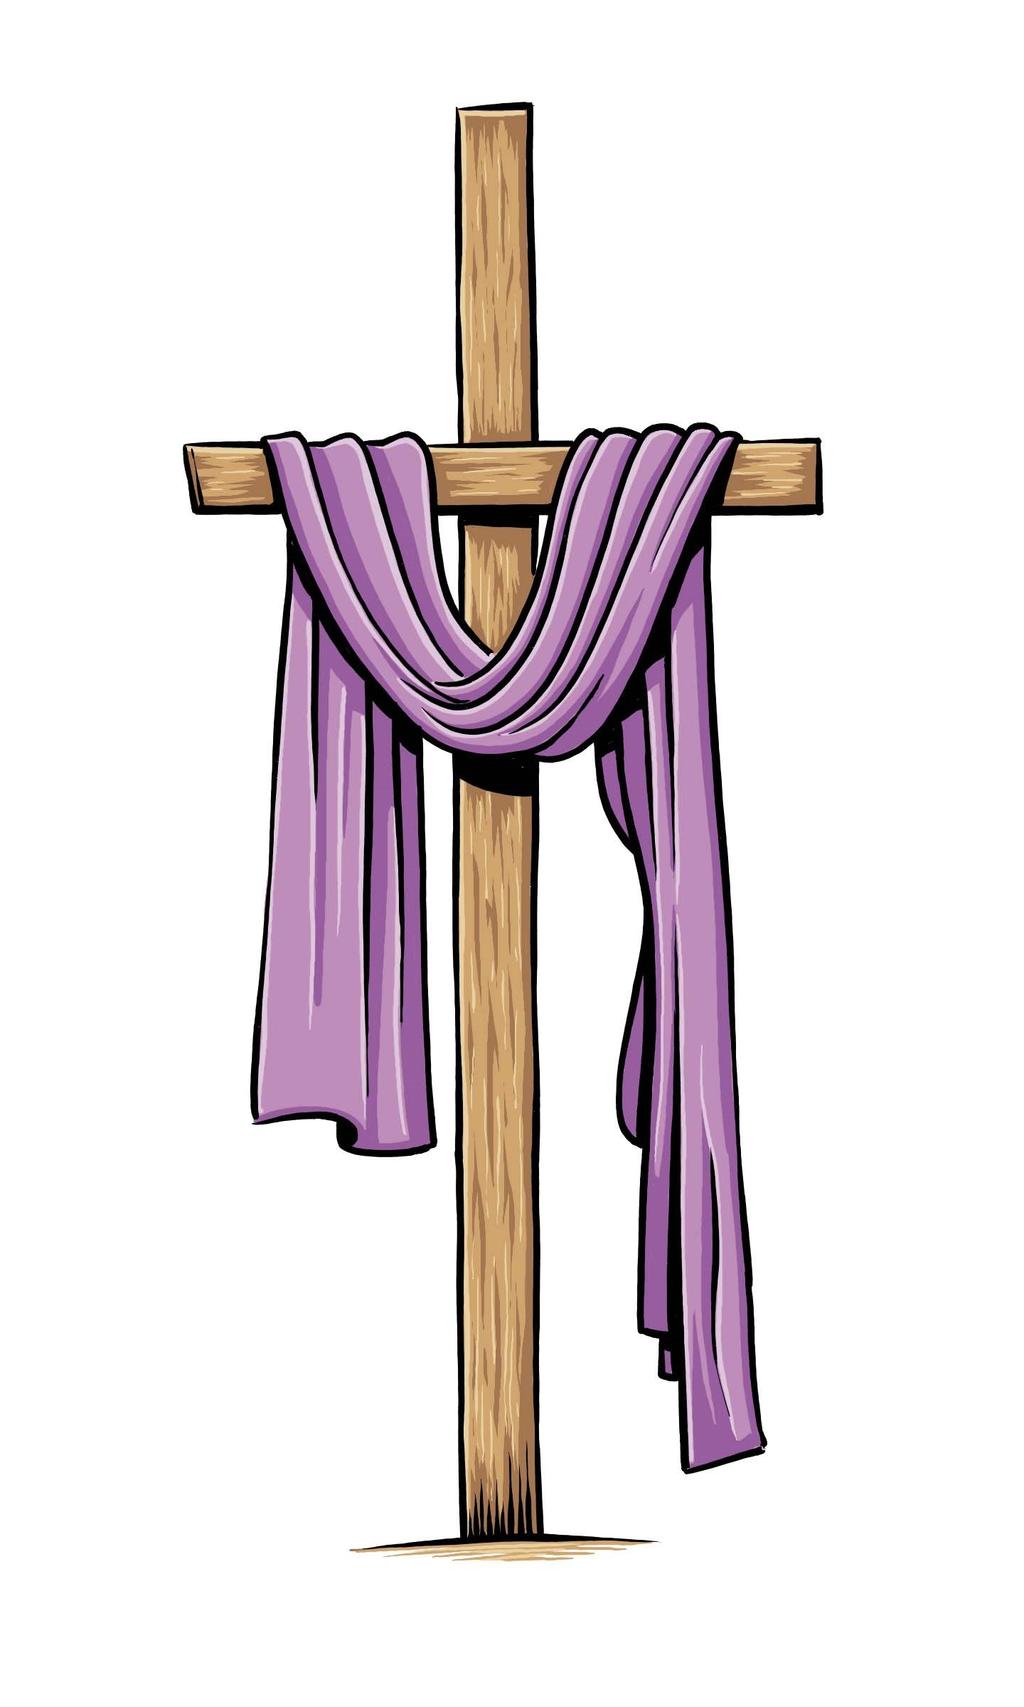 Lenten Schedule March 25 - Palm Sunday 8:45 am - Worship Service in Pulsifer Chapel 10:00 am - Family Worship in Sanctuary 11:15 am - Easter Egg Hunt 5:15 pm - Foundation Contemporary Worship in